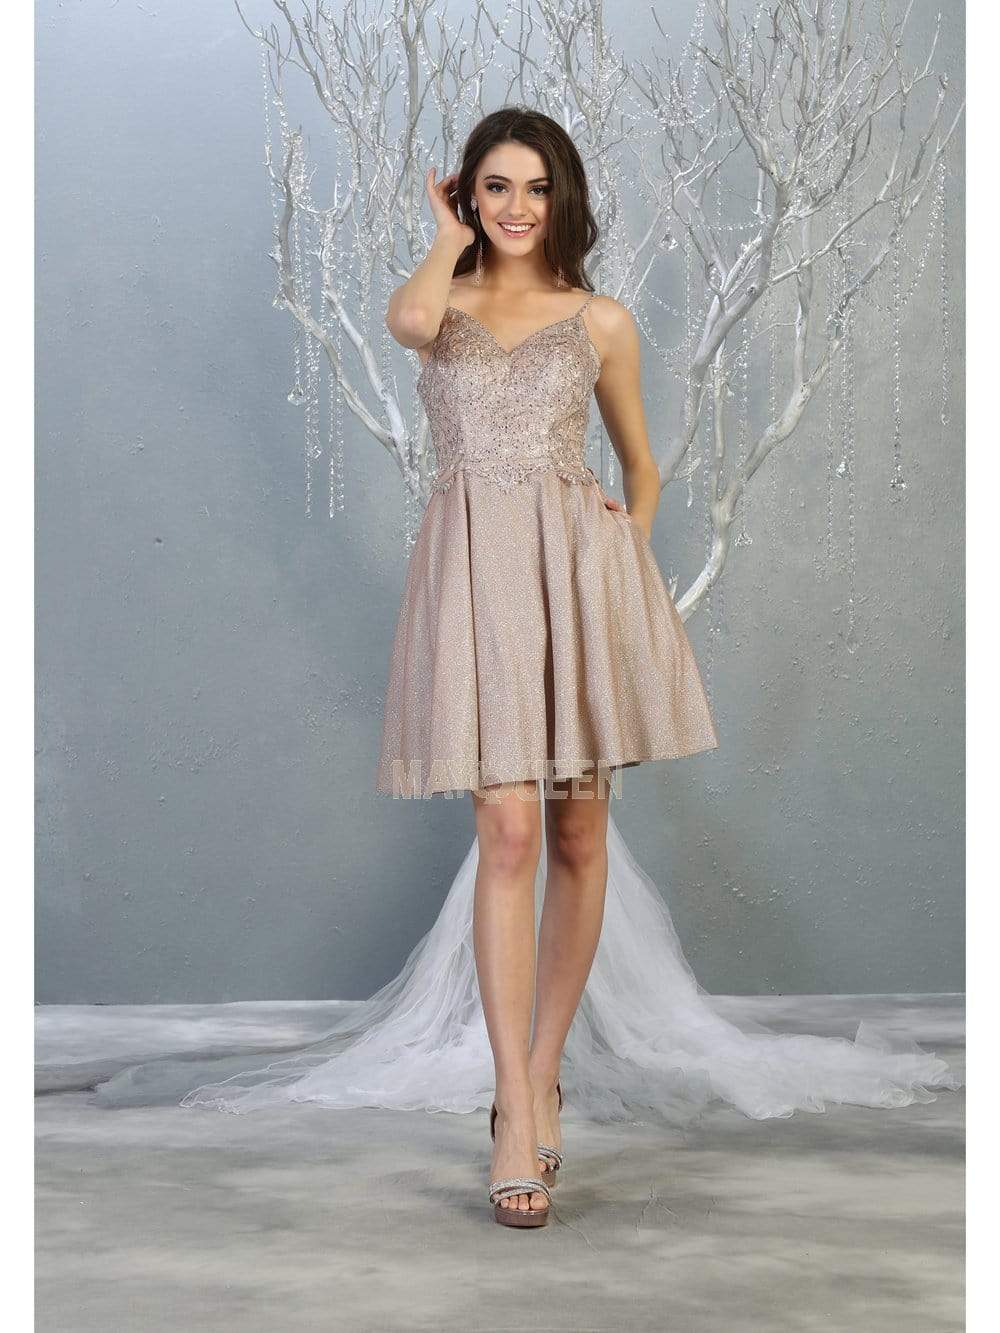 May Queen - MQ1802 Lace Applique-Ornate Glitter A-Line Dress Cocktail Dresses 4 / Rose Gold